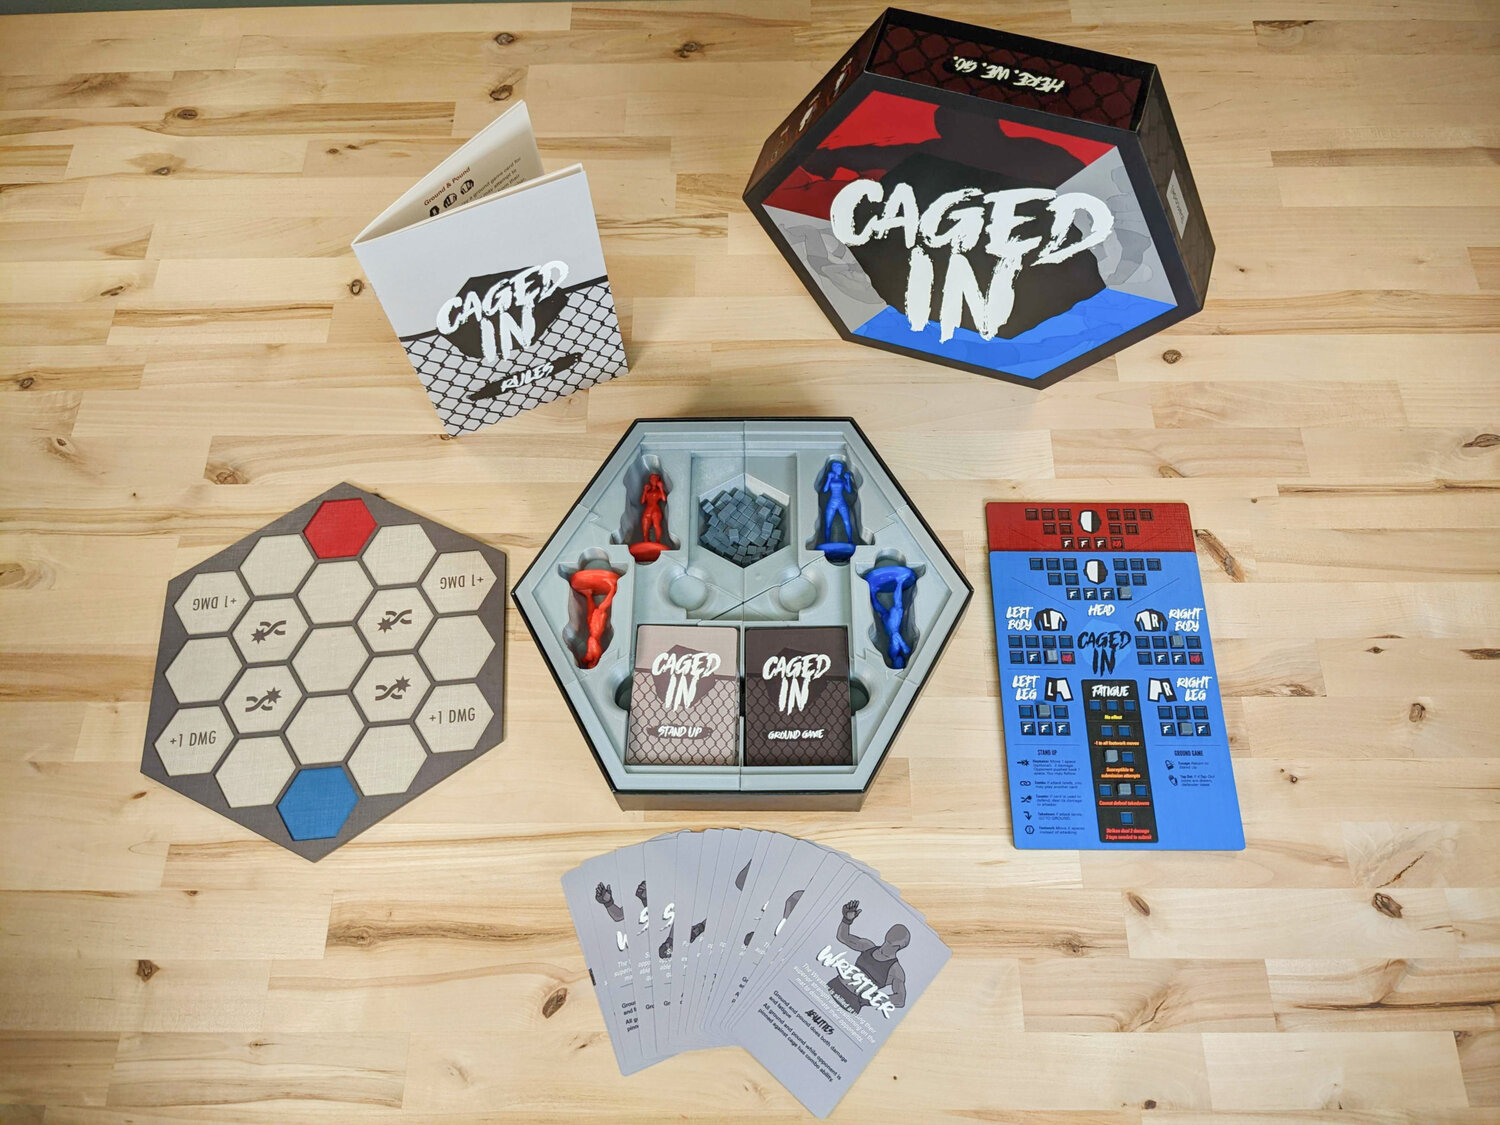 Caged In is bringing mixed martial arts to the world of board games.